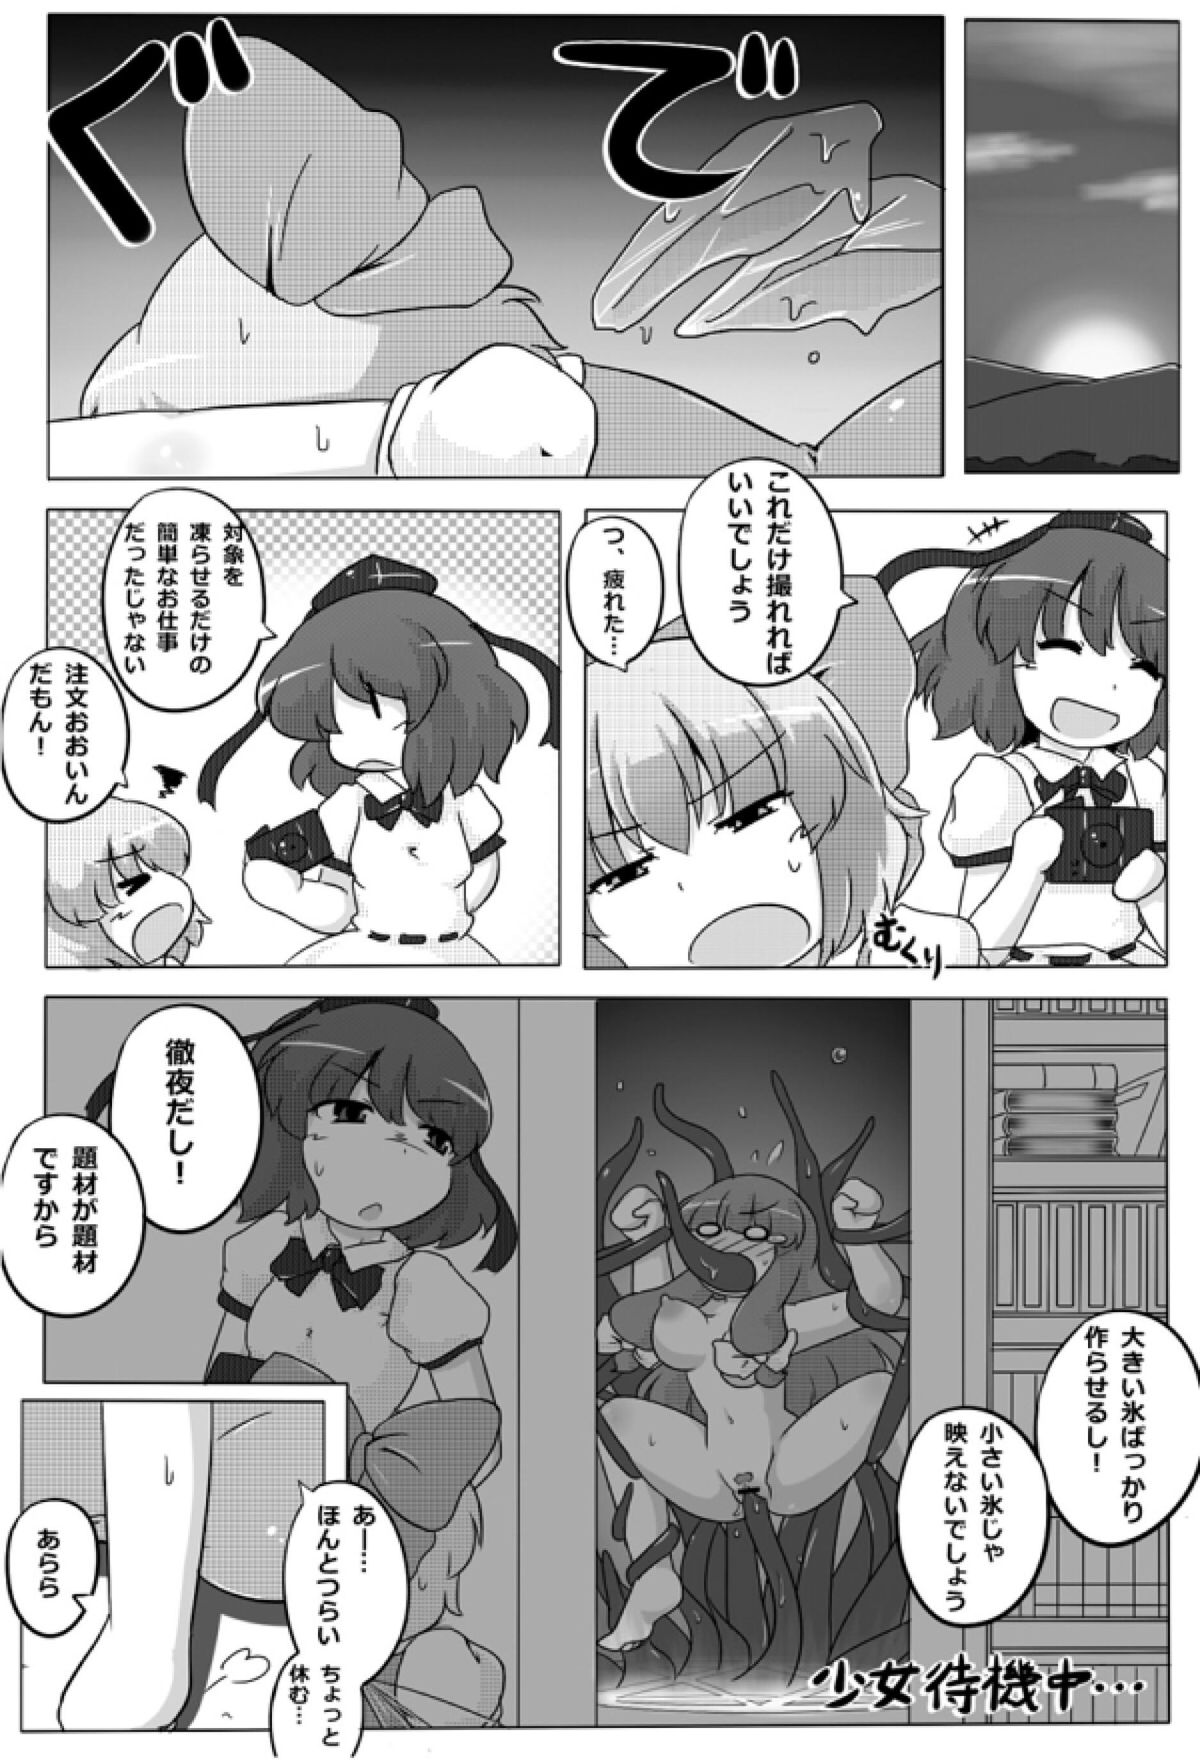 [GOLD LEAF (Sukedai)] Cirno Spoiler (Touhou Project) [Digital] page 9 full